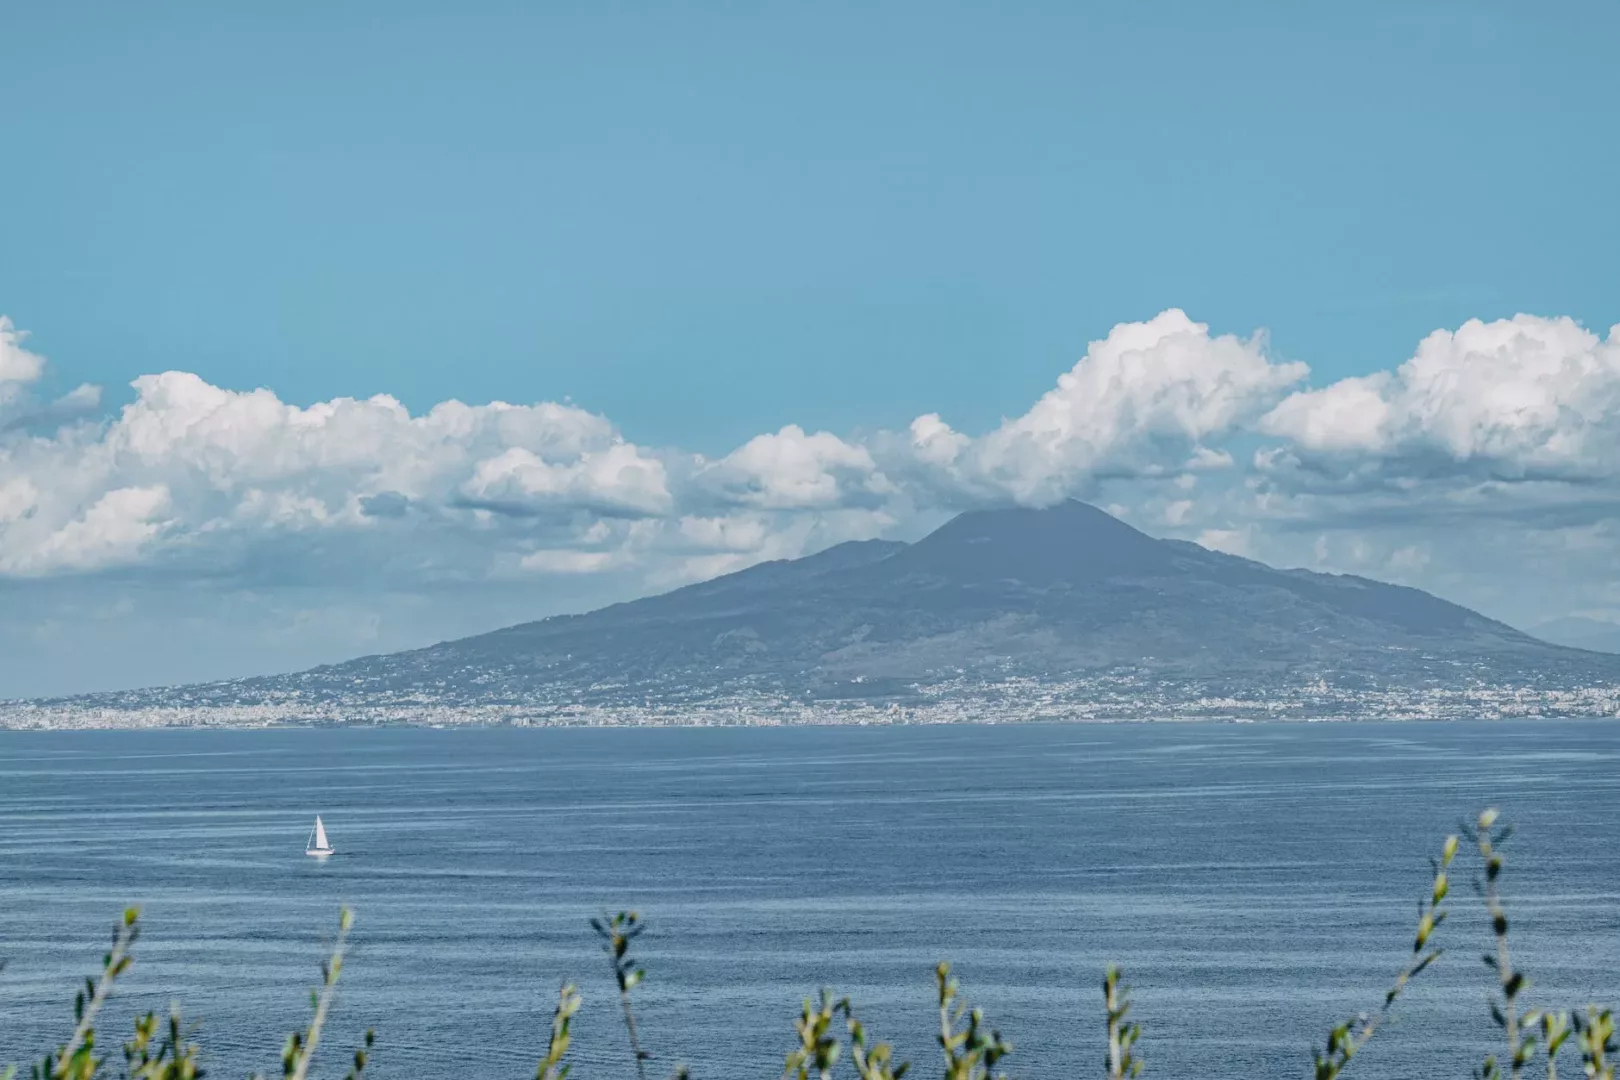 a view of the mount vesuvius in italy